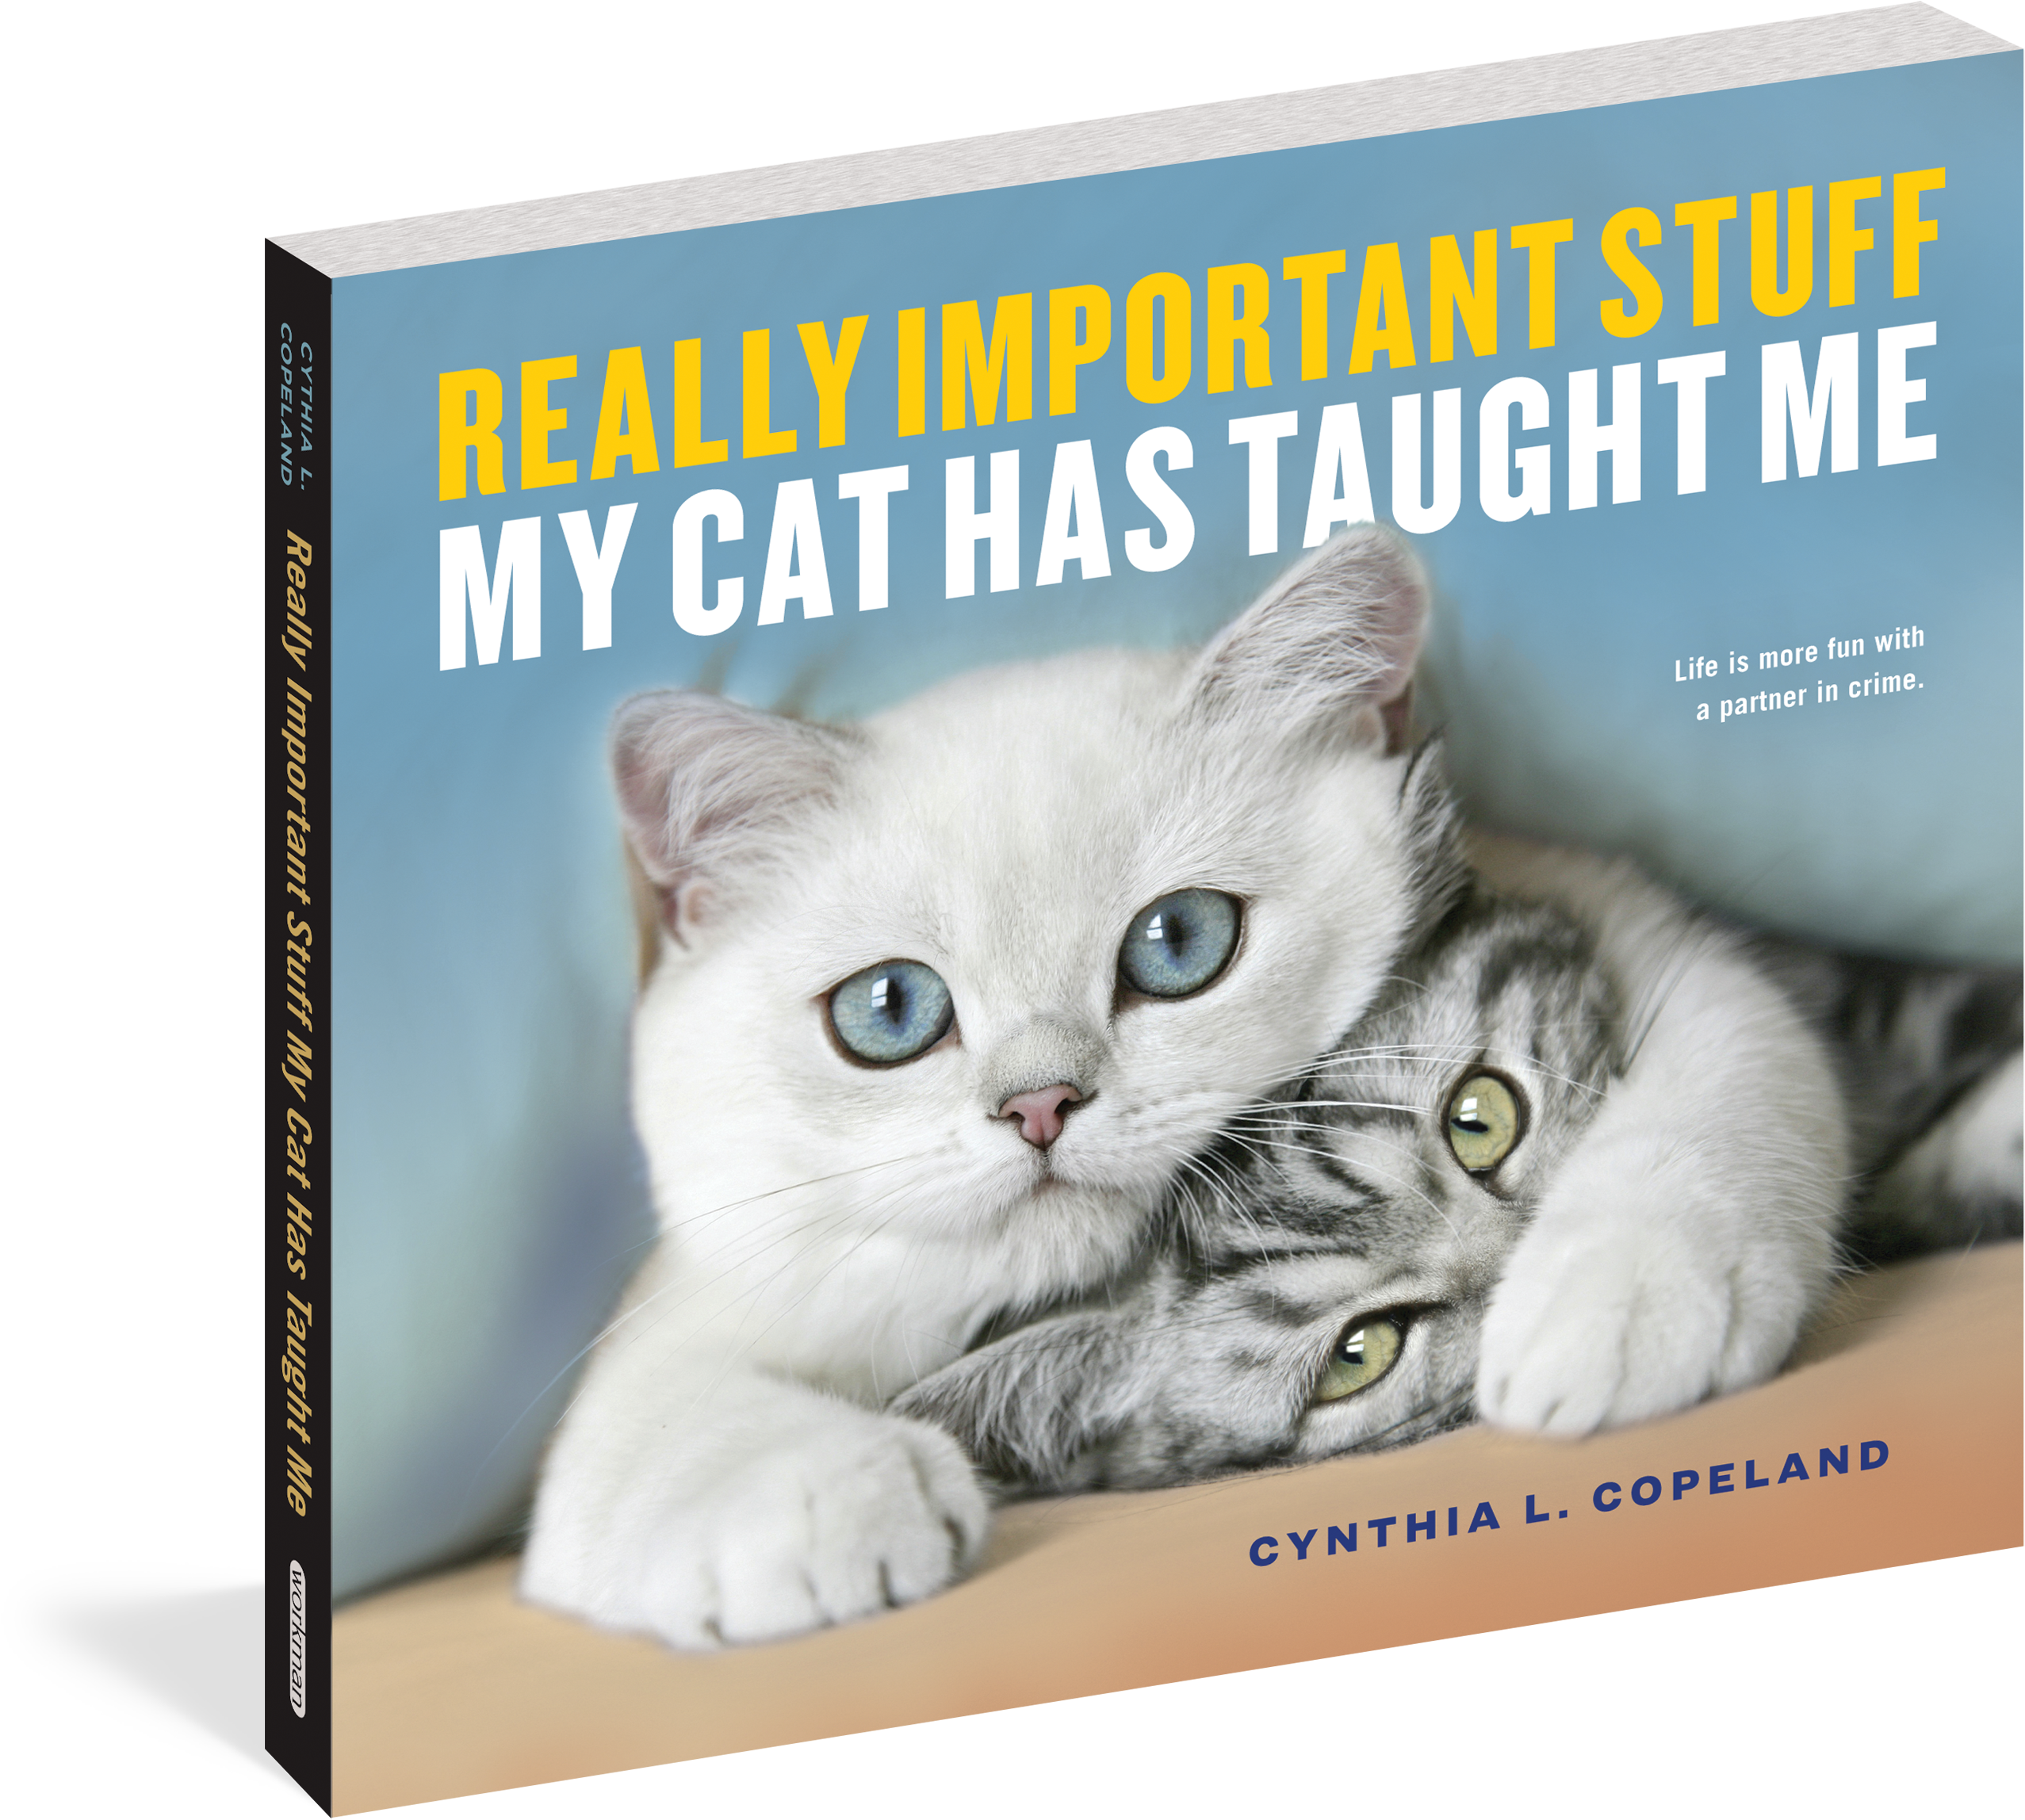 A Book Cover With Two Cats